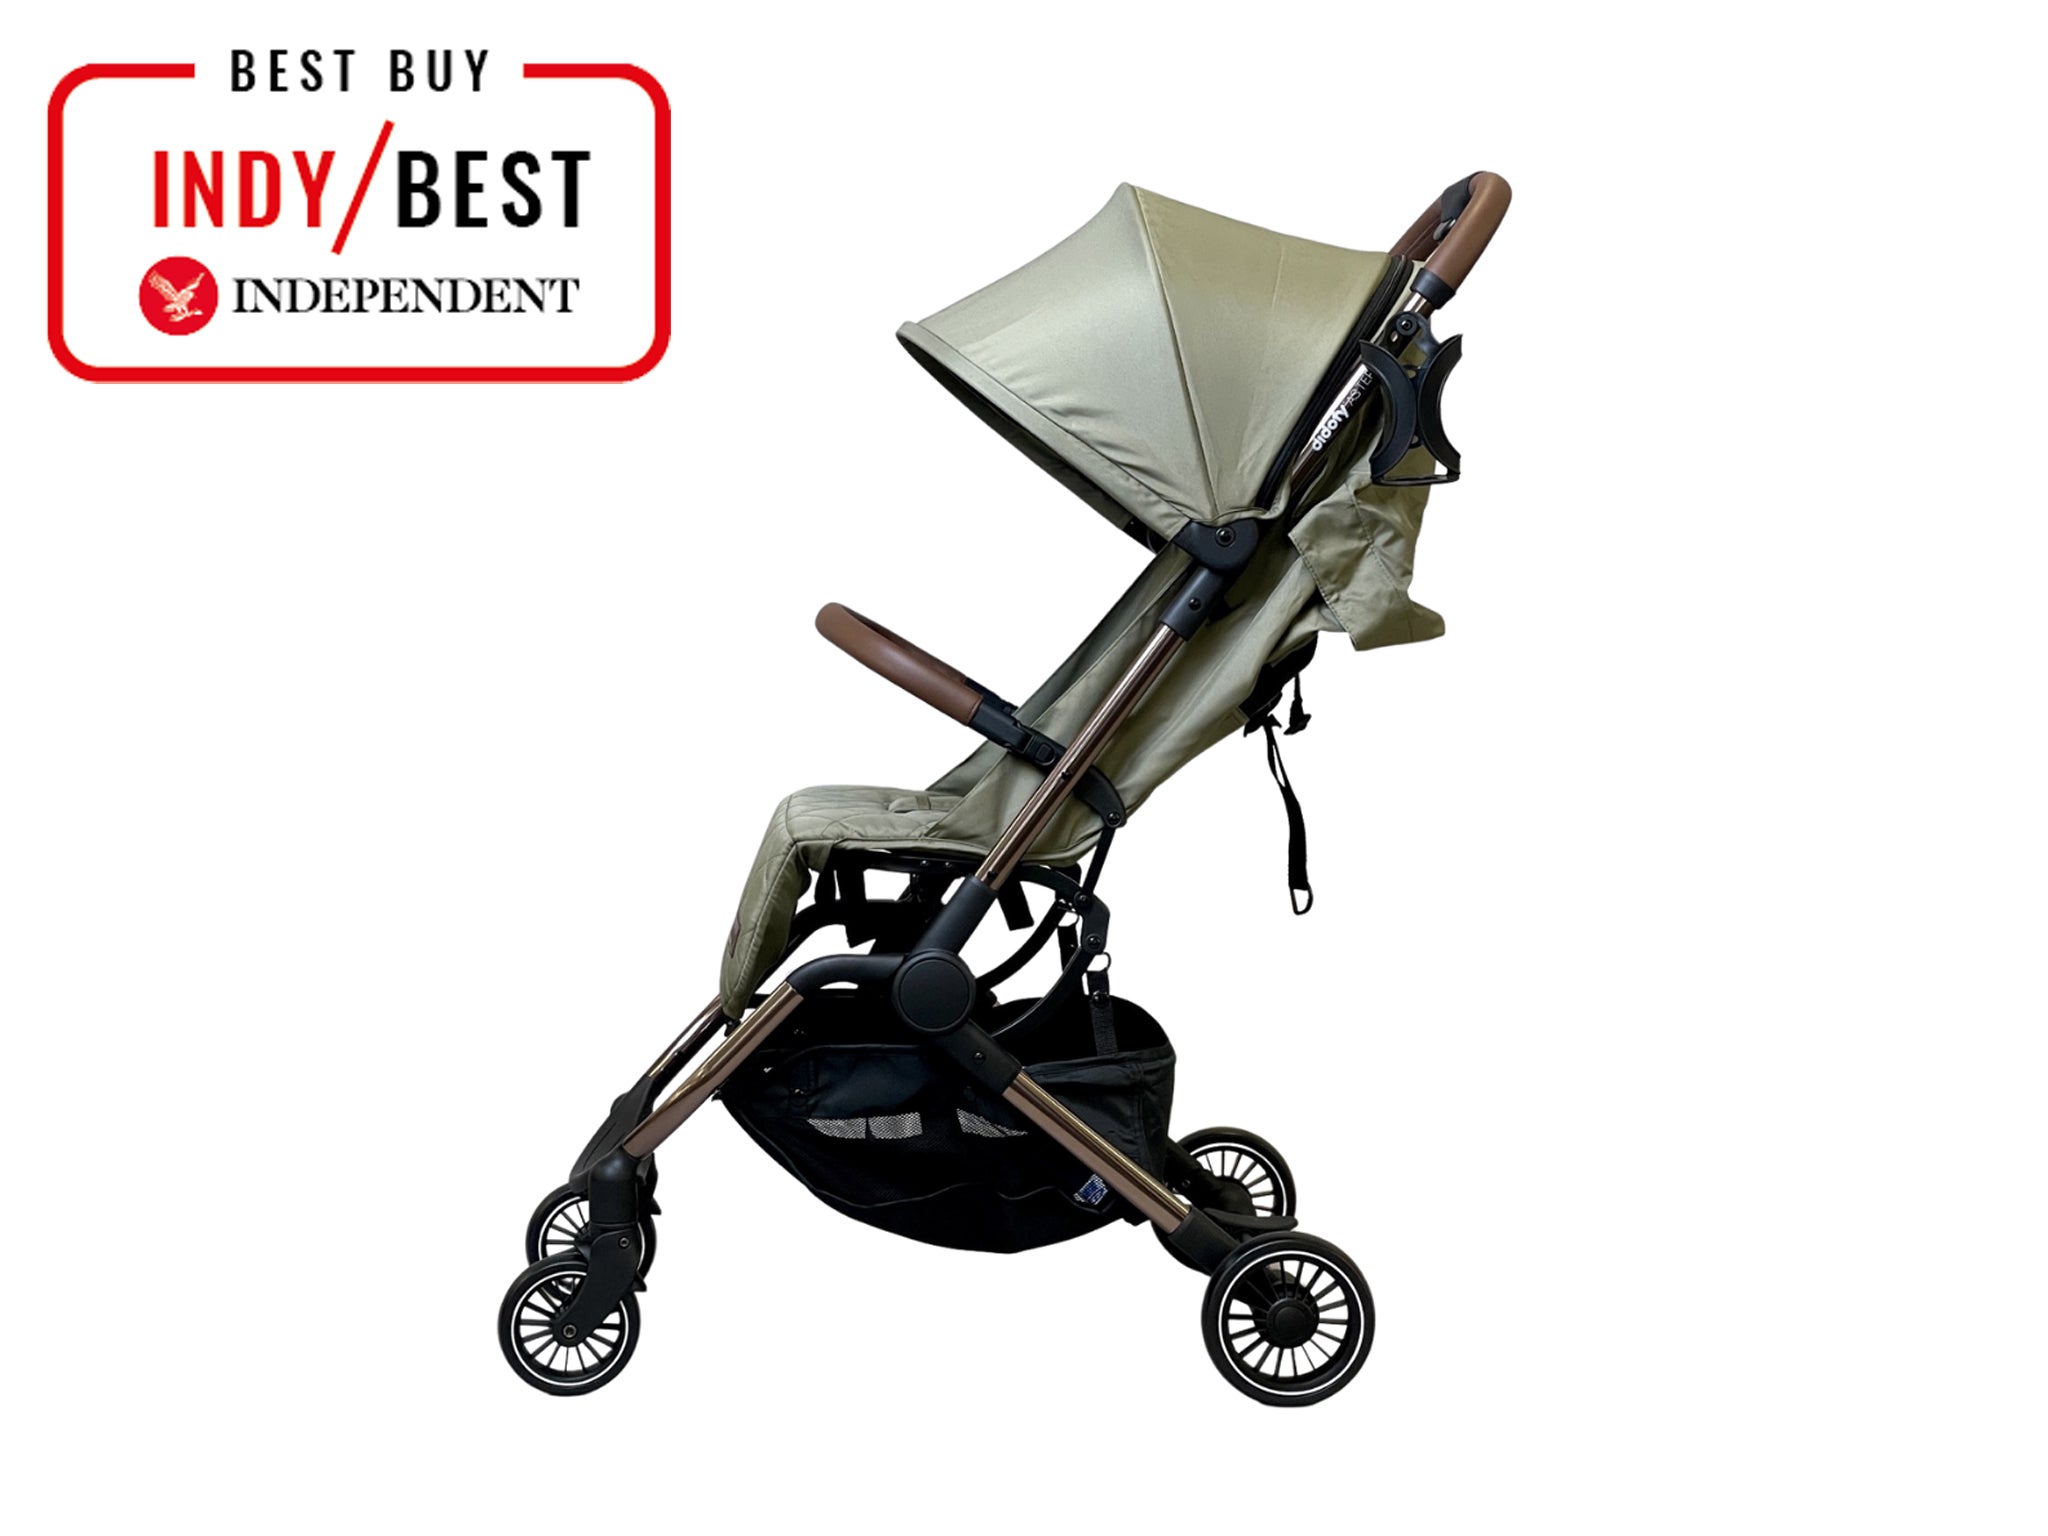 Best Compact Stroller Buggy Lightweight And Collapsible Buggies For Hassle Free Travel The Independent